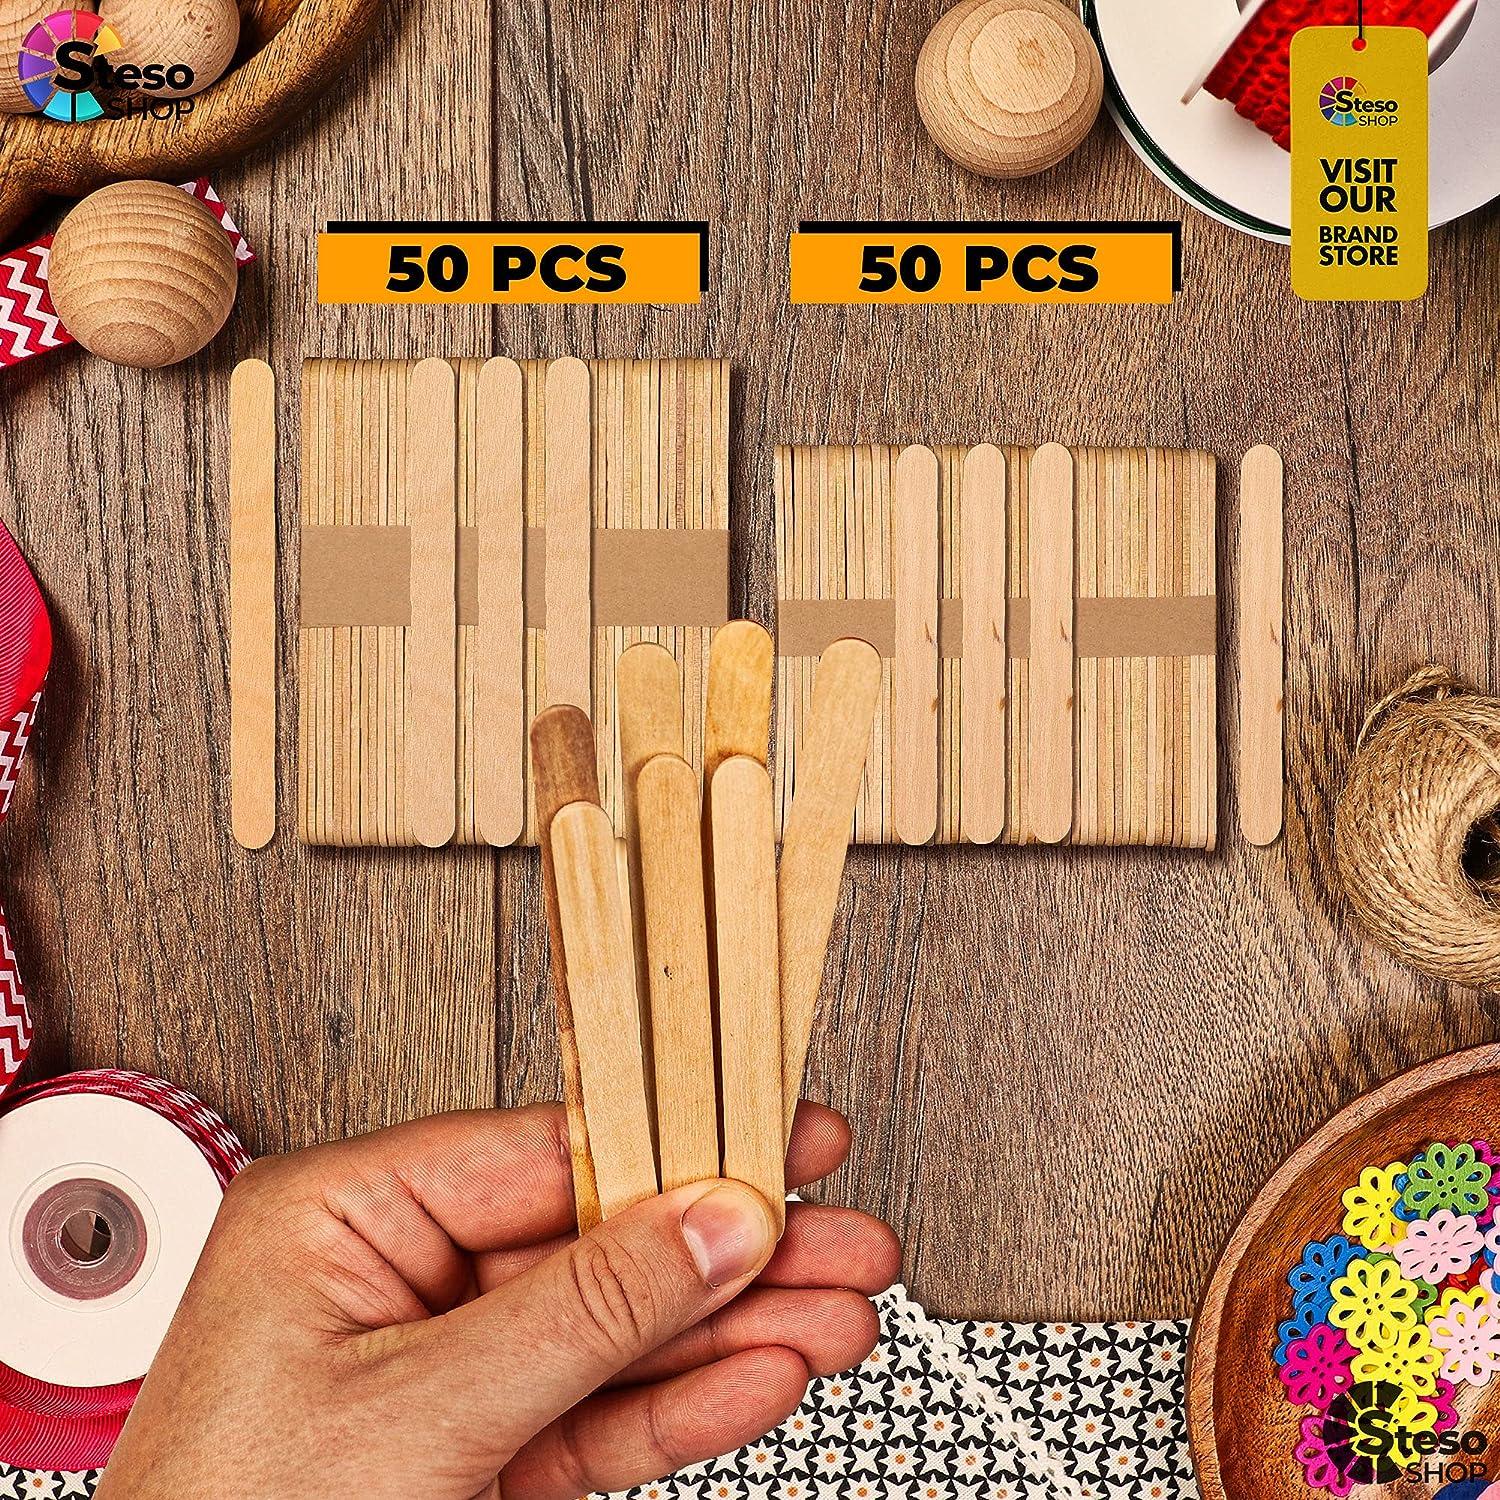 What are the differences between craft sticks and popsicle sticks?